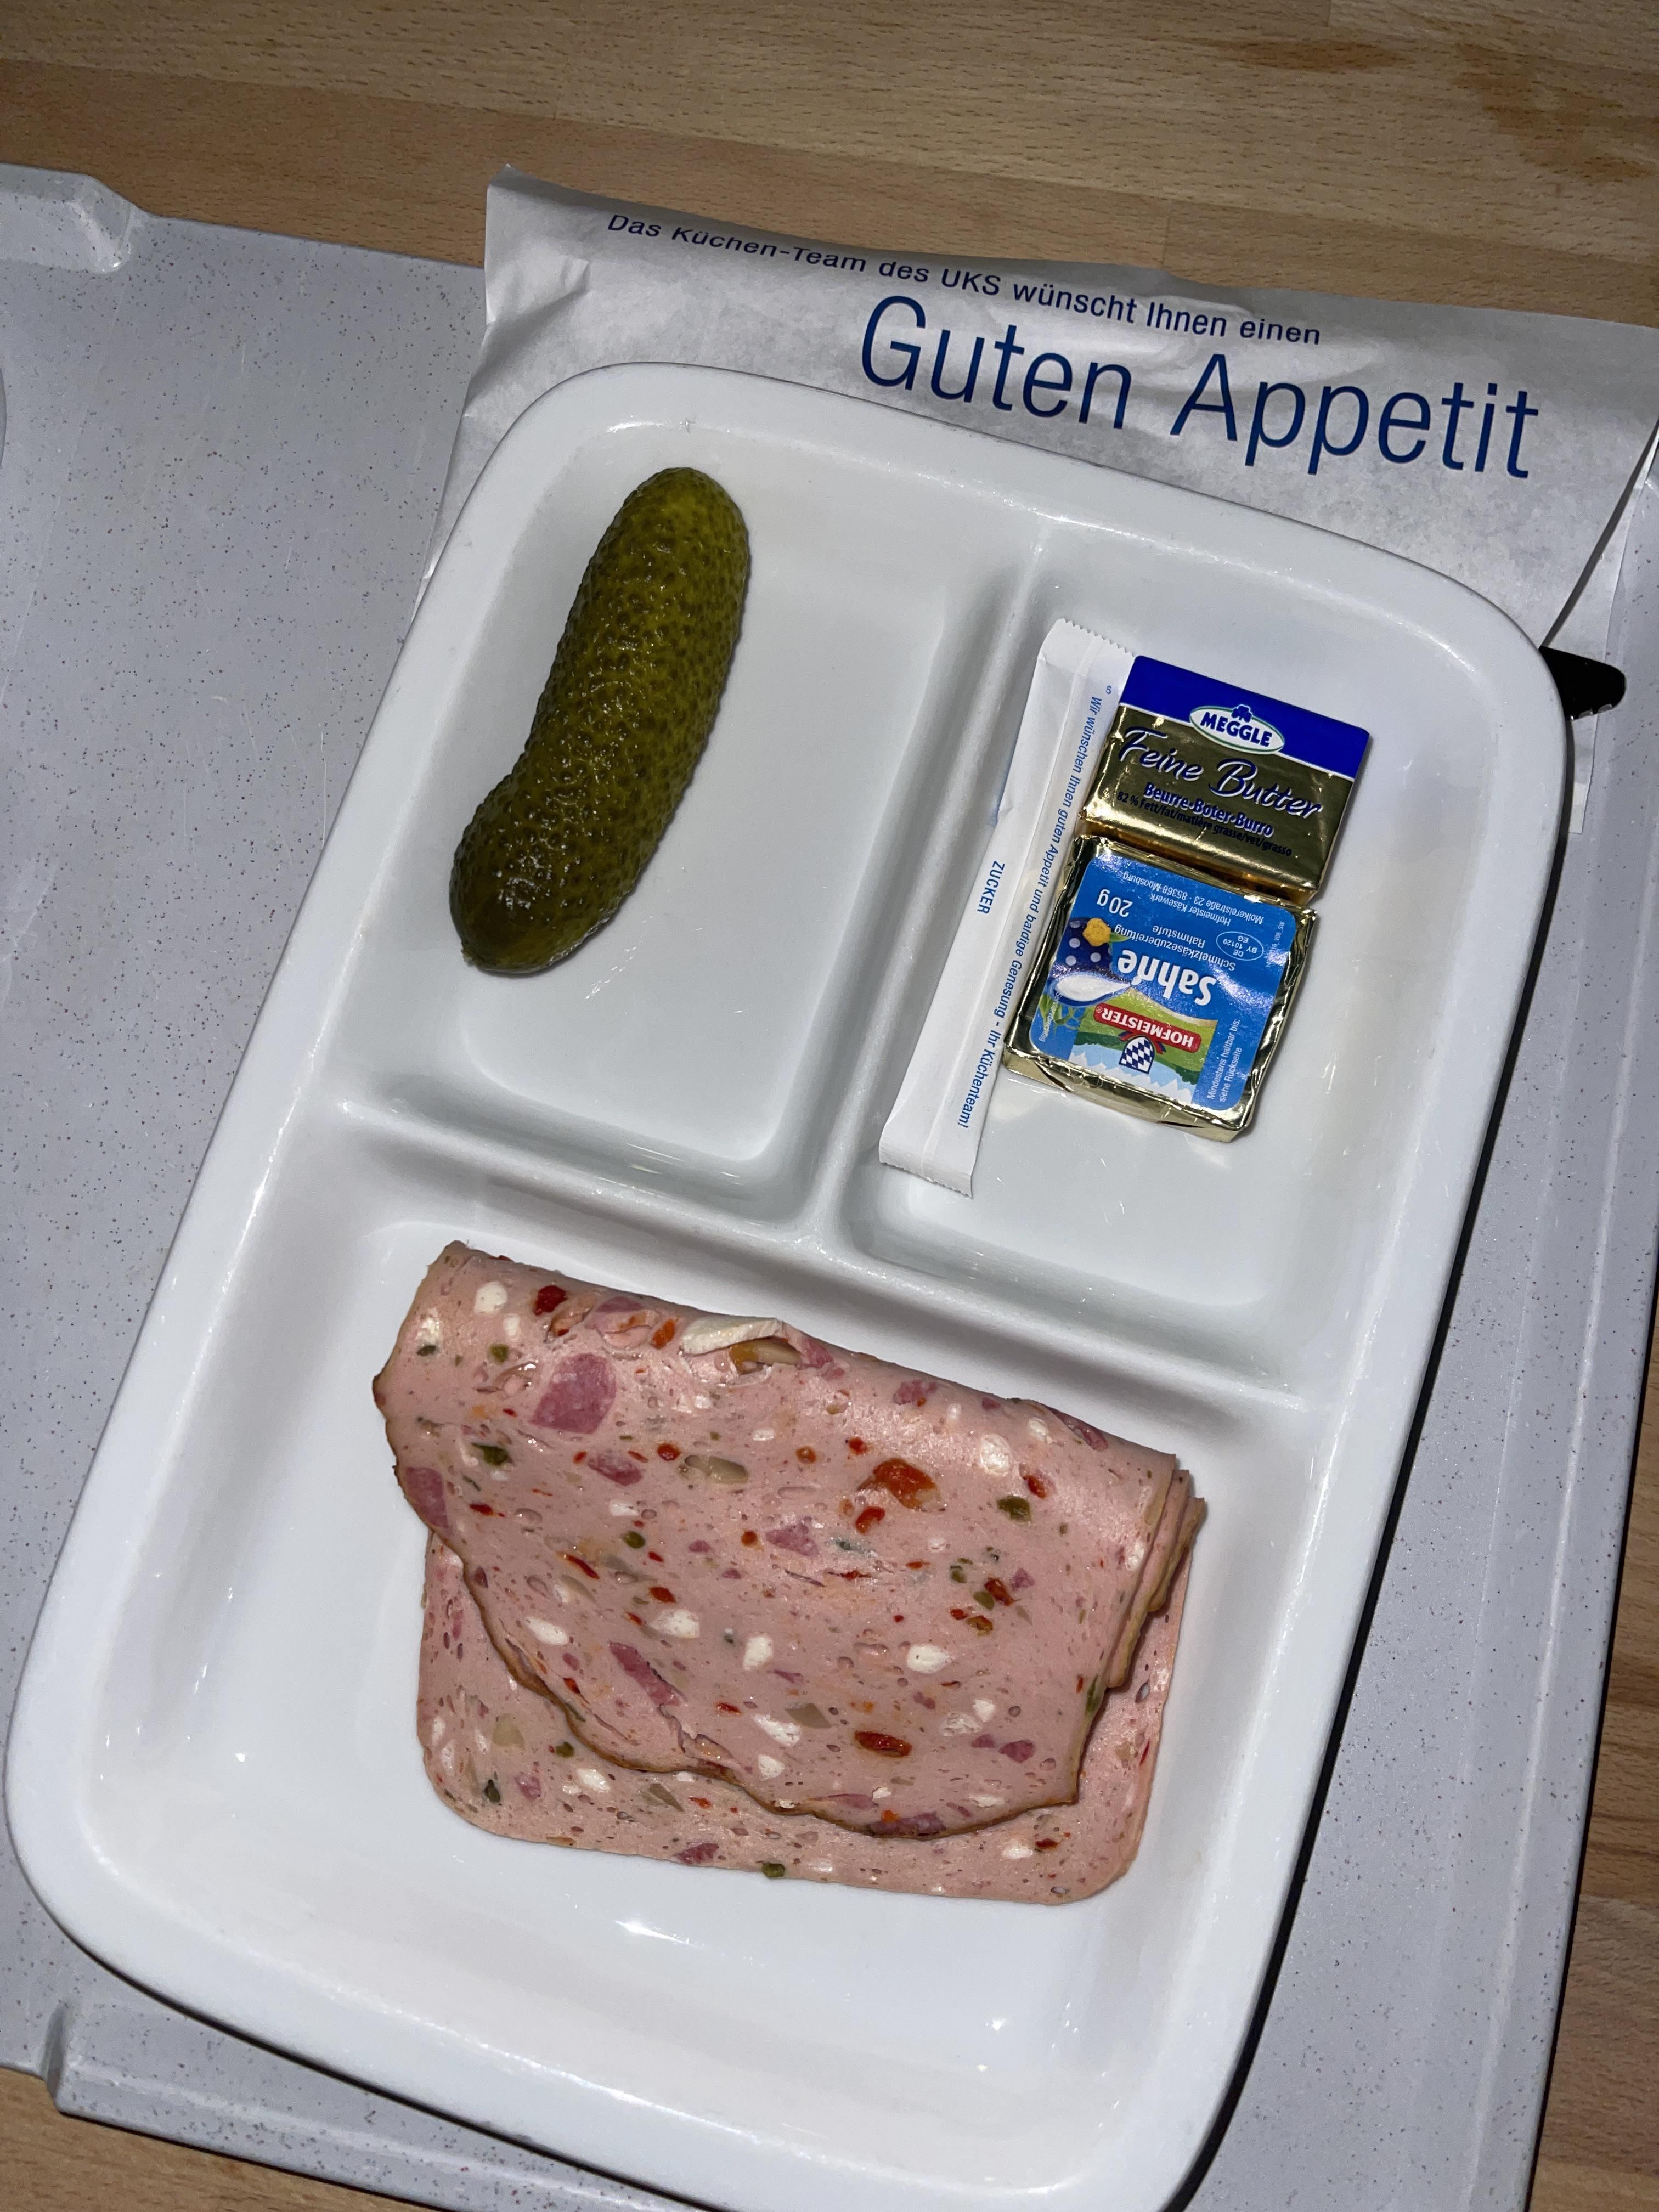 My wife recently delivered in a German Hospital and was looking forward to her first meal… the meal.